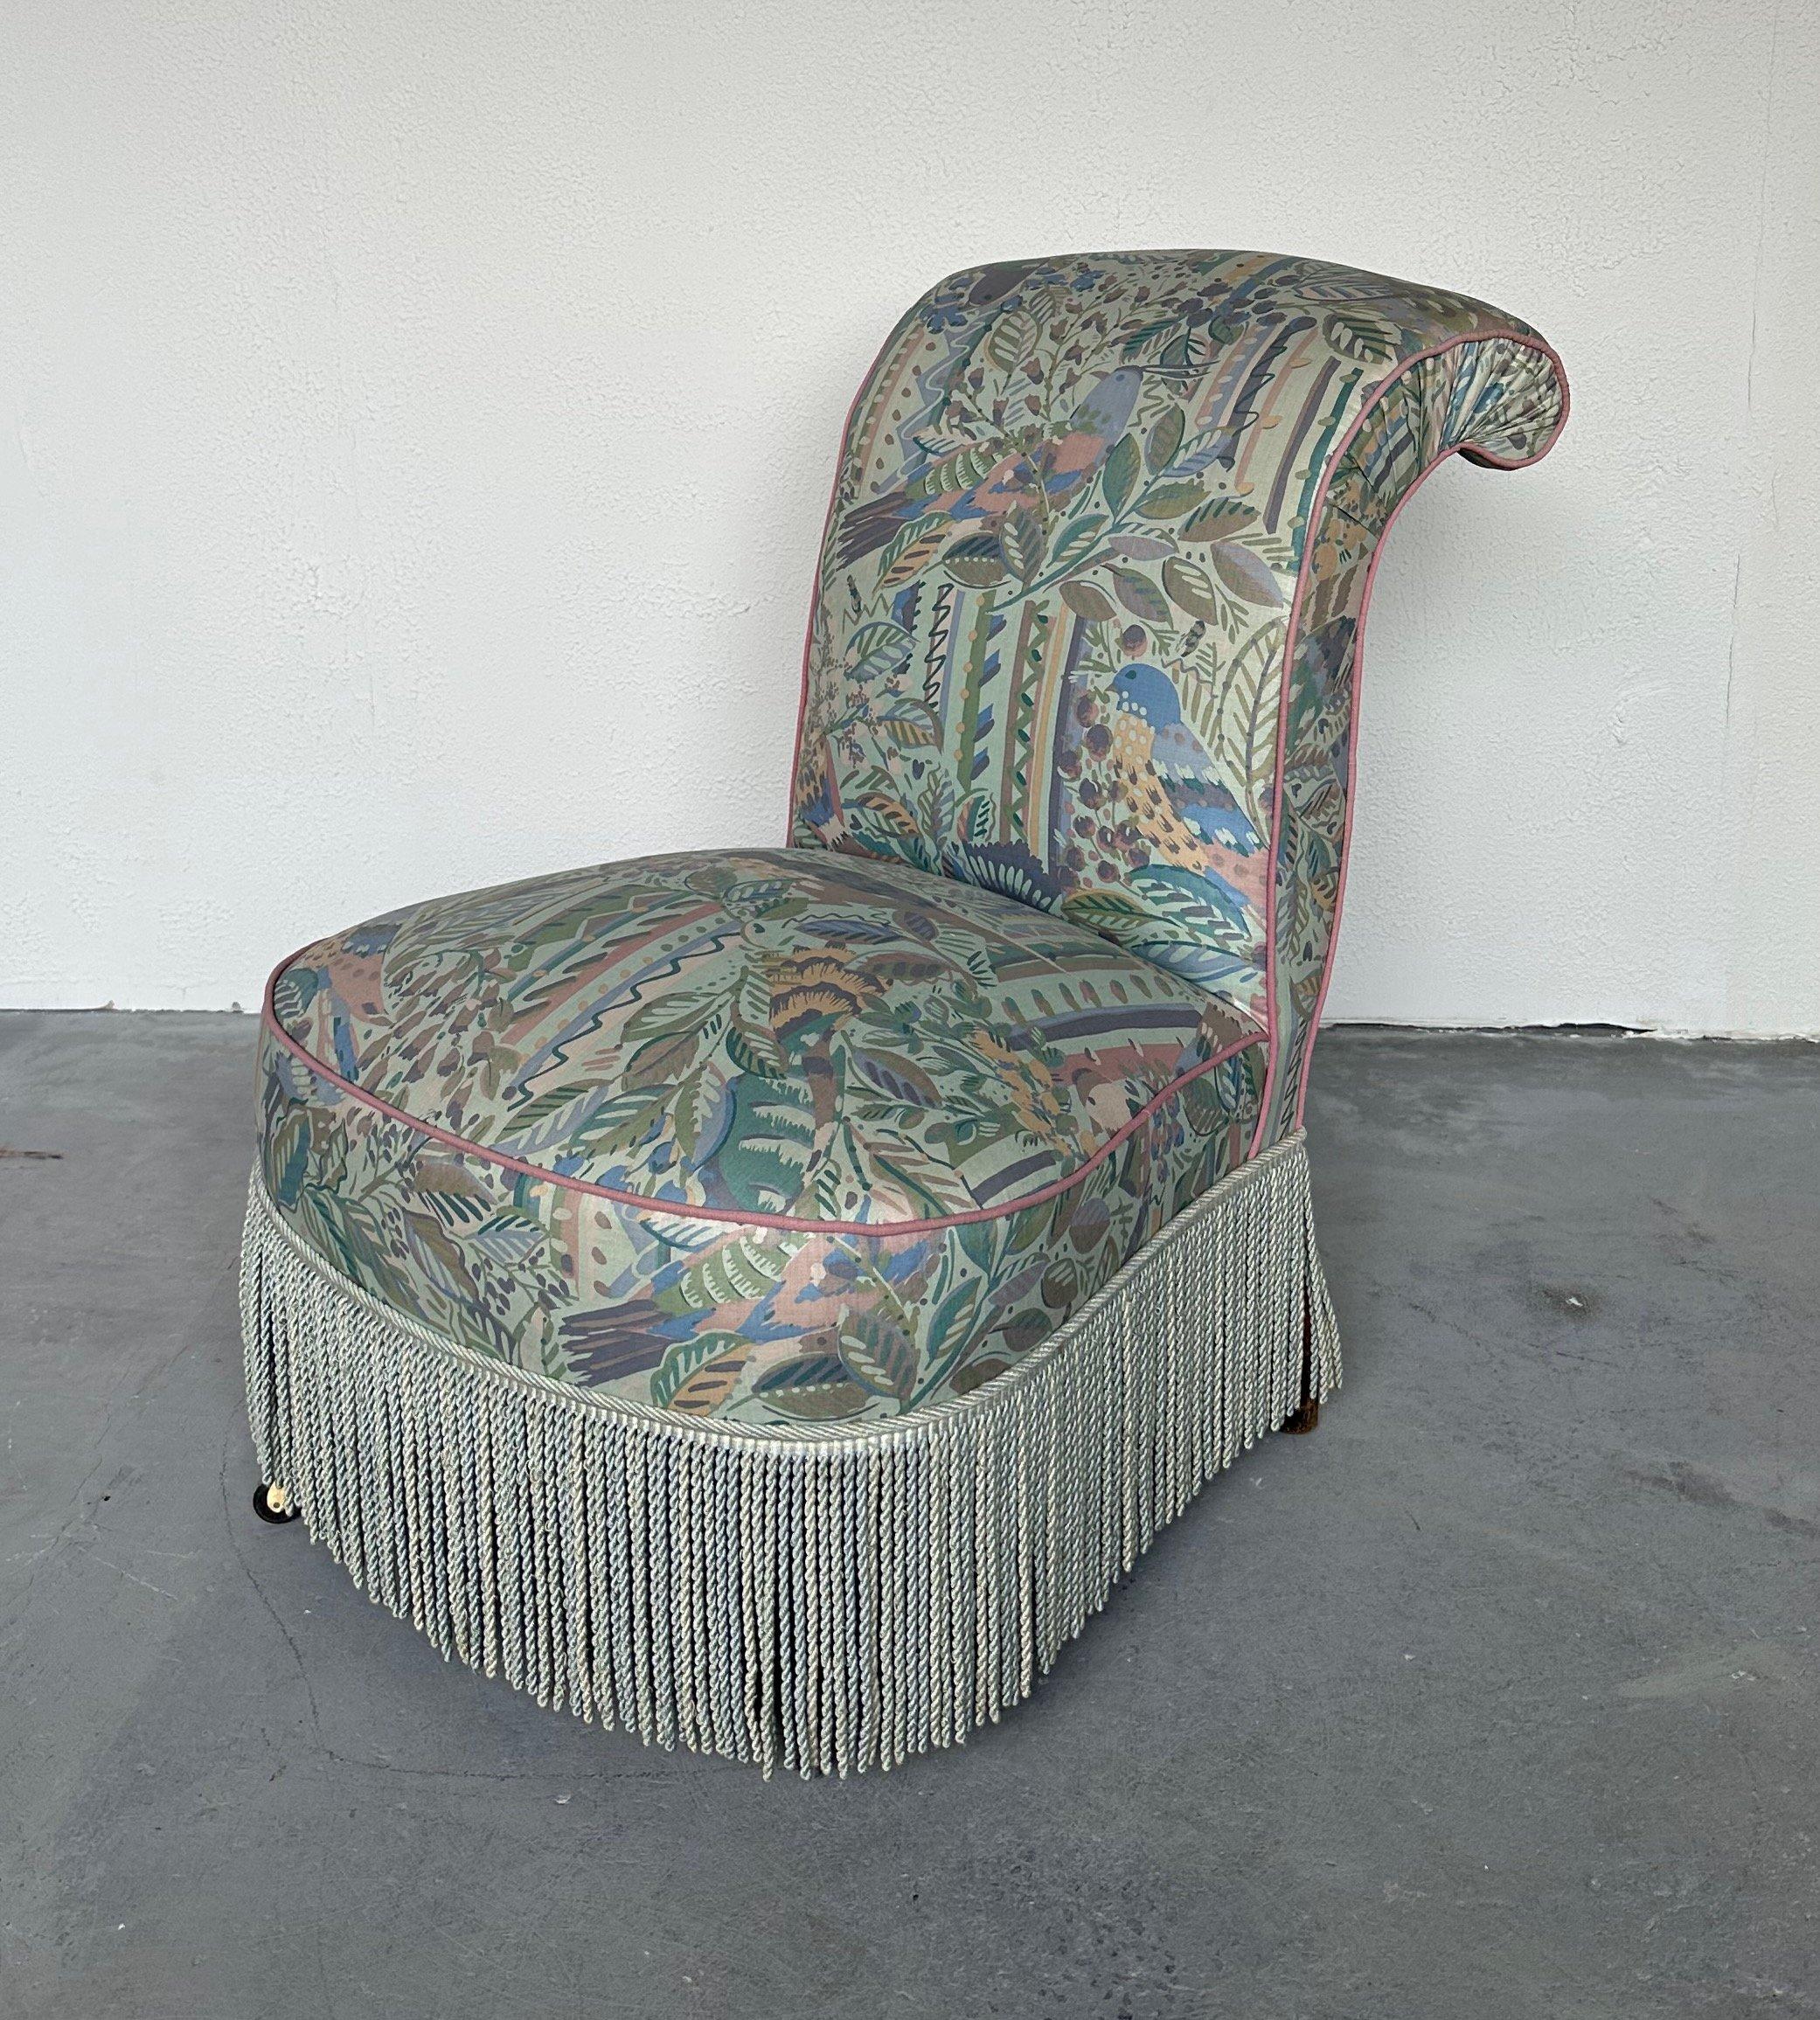 This lovely 19th century French Napoleon III slipper chair features a gracefully scrolled back, and has been upholstered in an elegant fabric with an abstract leafy design with birds. It is expertly finished in rose colored piping and complimentary